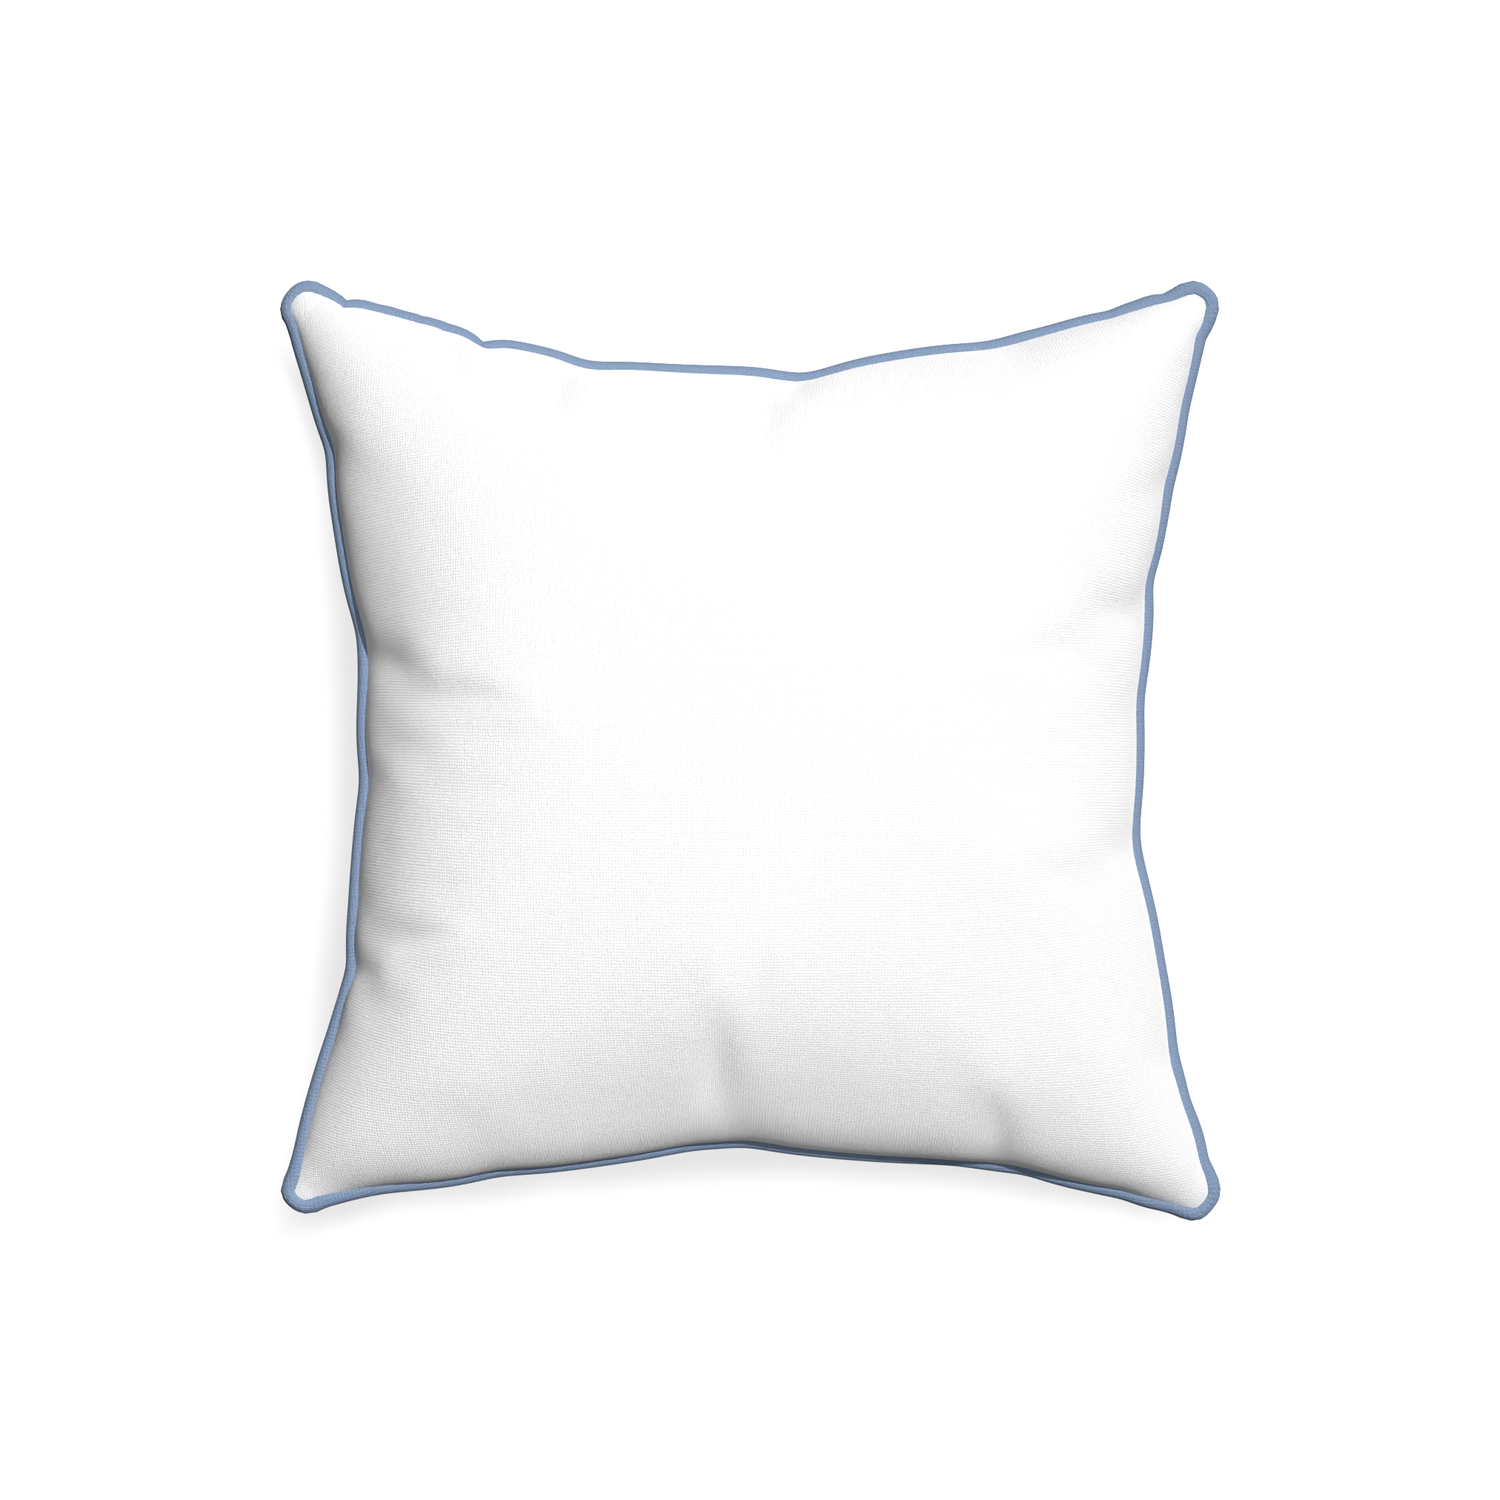 20-square snow custom white cottonpillow with sky piping on white background